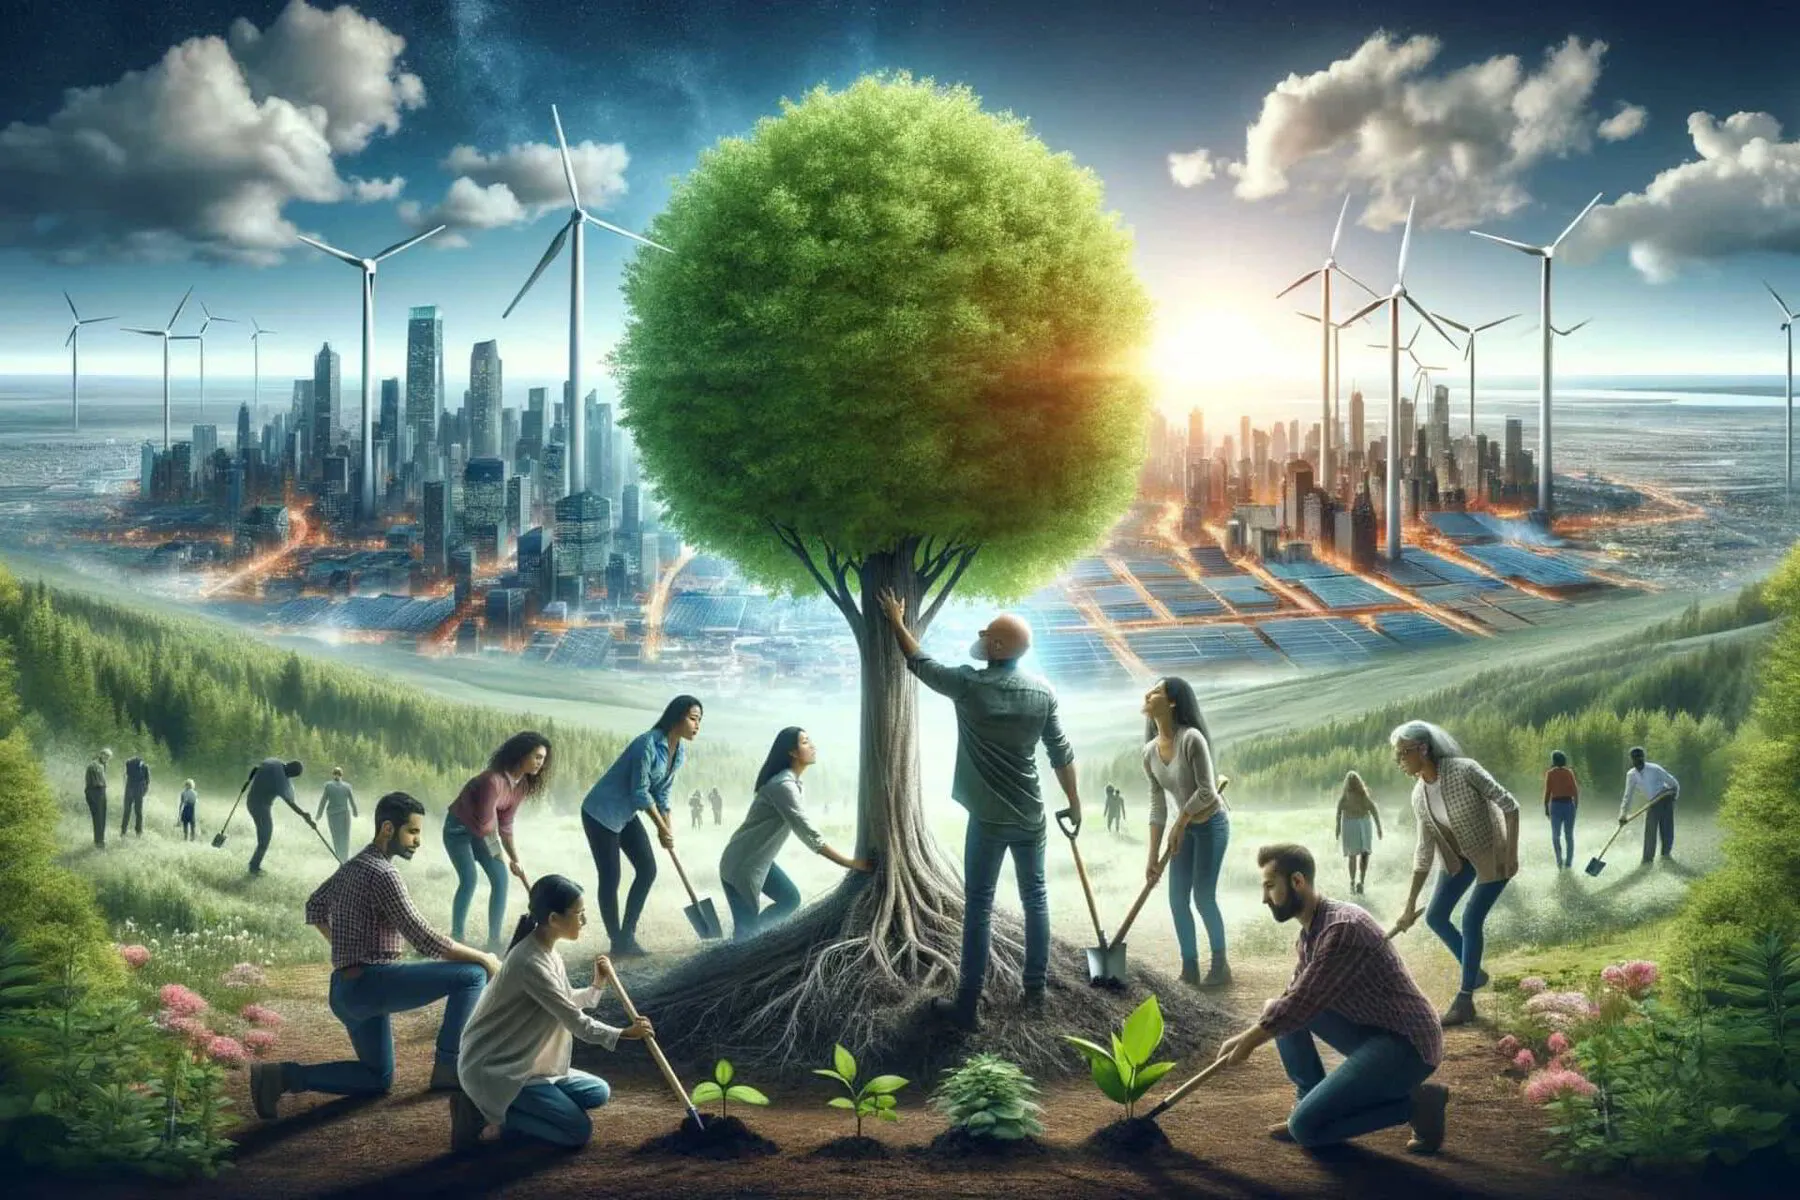 A powerful and inspiring image symbolizing overcoming sustainability challenges